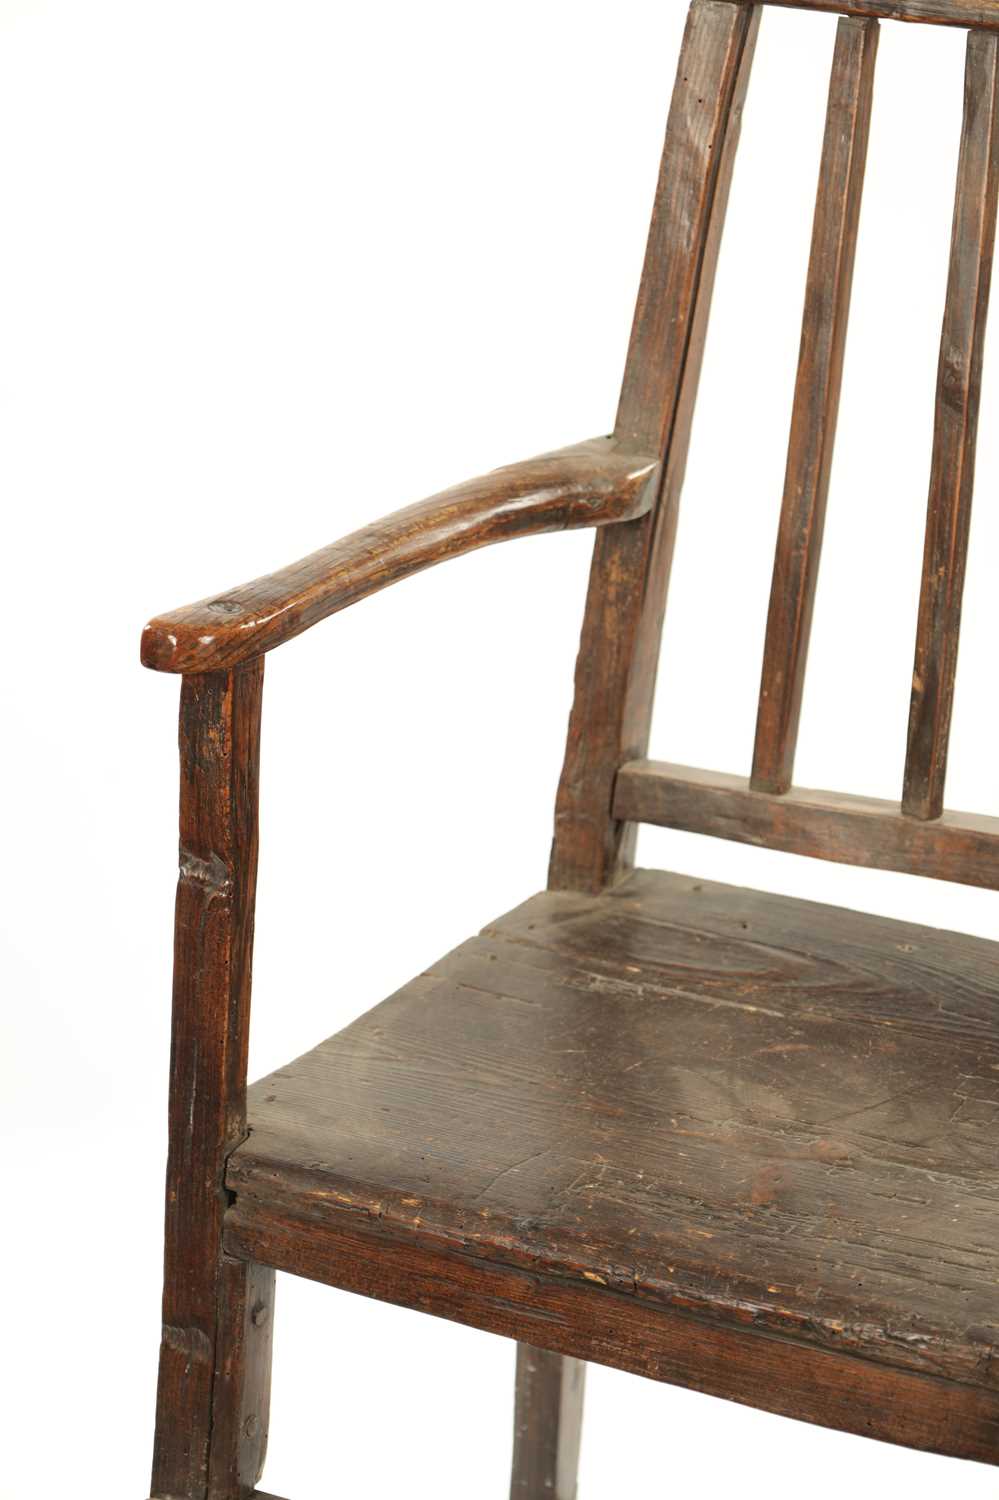 A PRIMITIVE 18TH CENTURY CHILDS FRUITWOOD SPLAT BACK HIGH CHAIR - Image 4 of 7